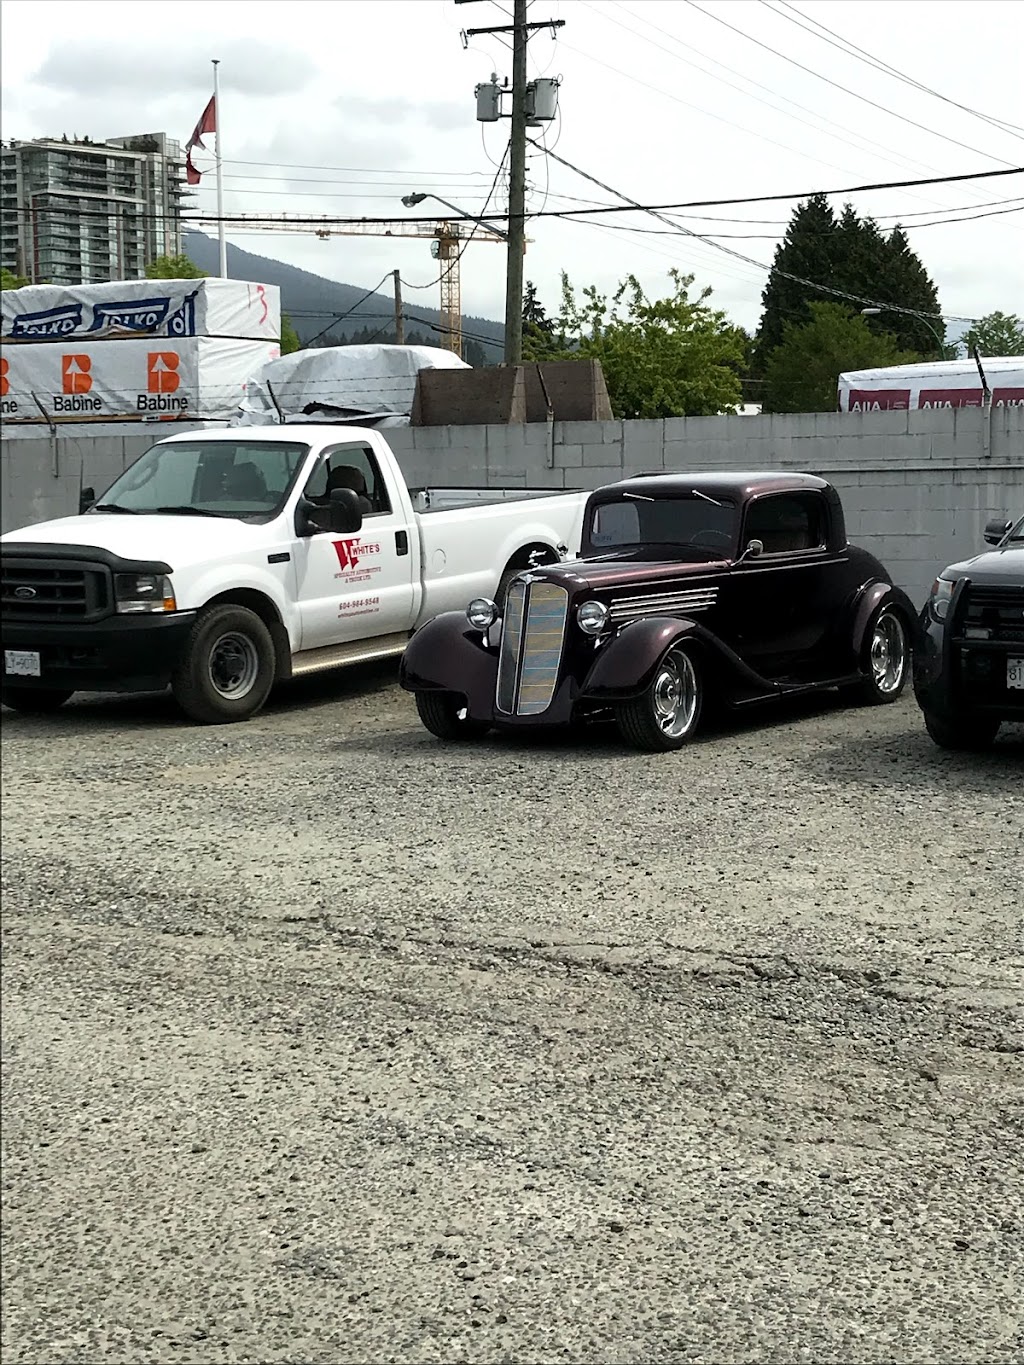 Whites Specialty Auto & Truck | car repair | 1355 Crown St, North Vancouver, BC V7J 1G4, Canada | 6049849548 OR +1 604-984-9548